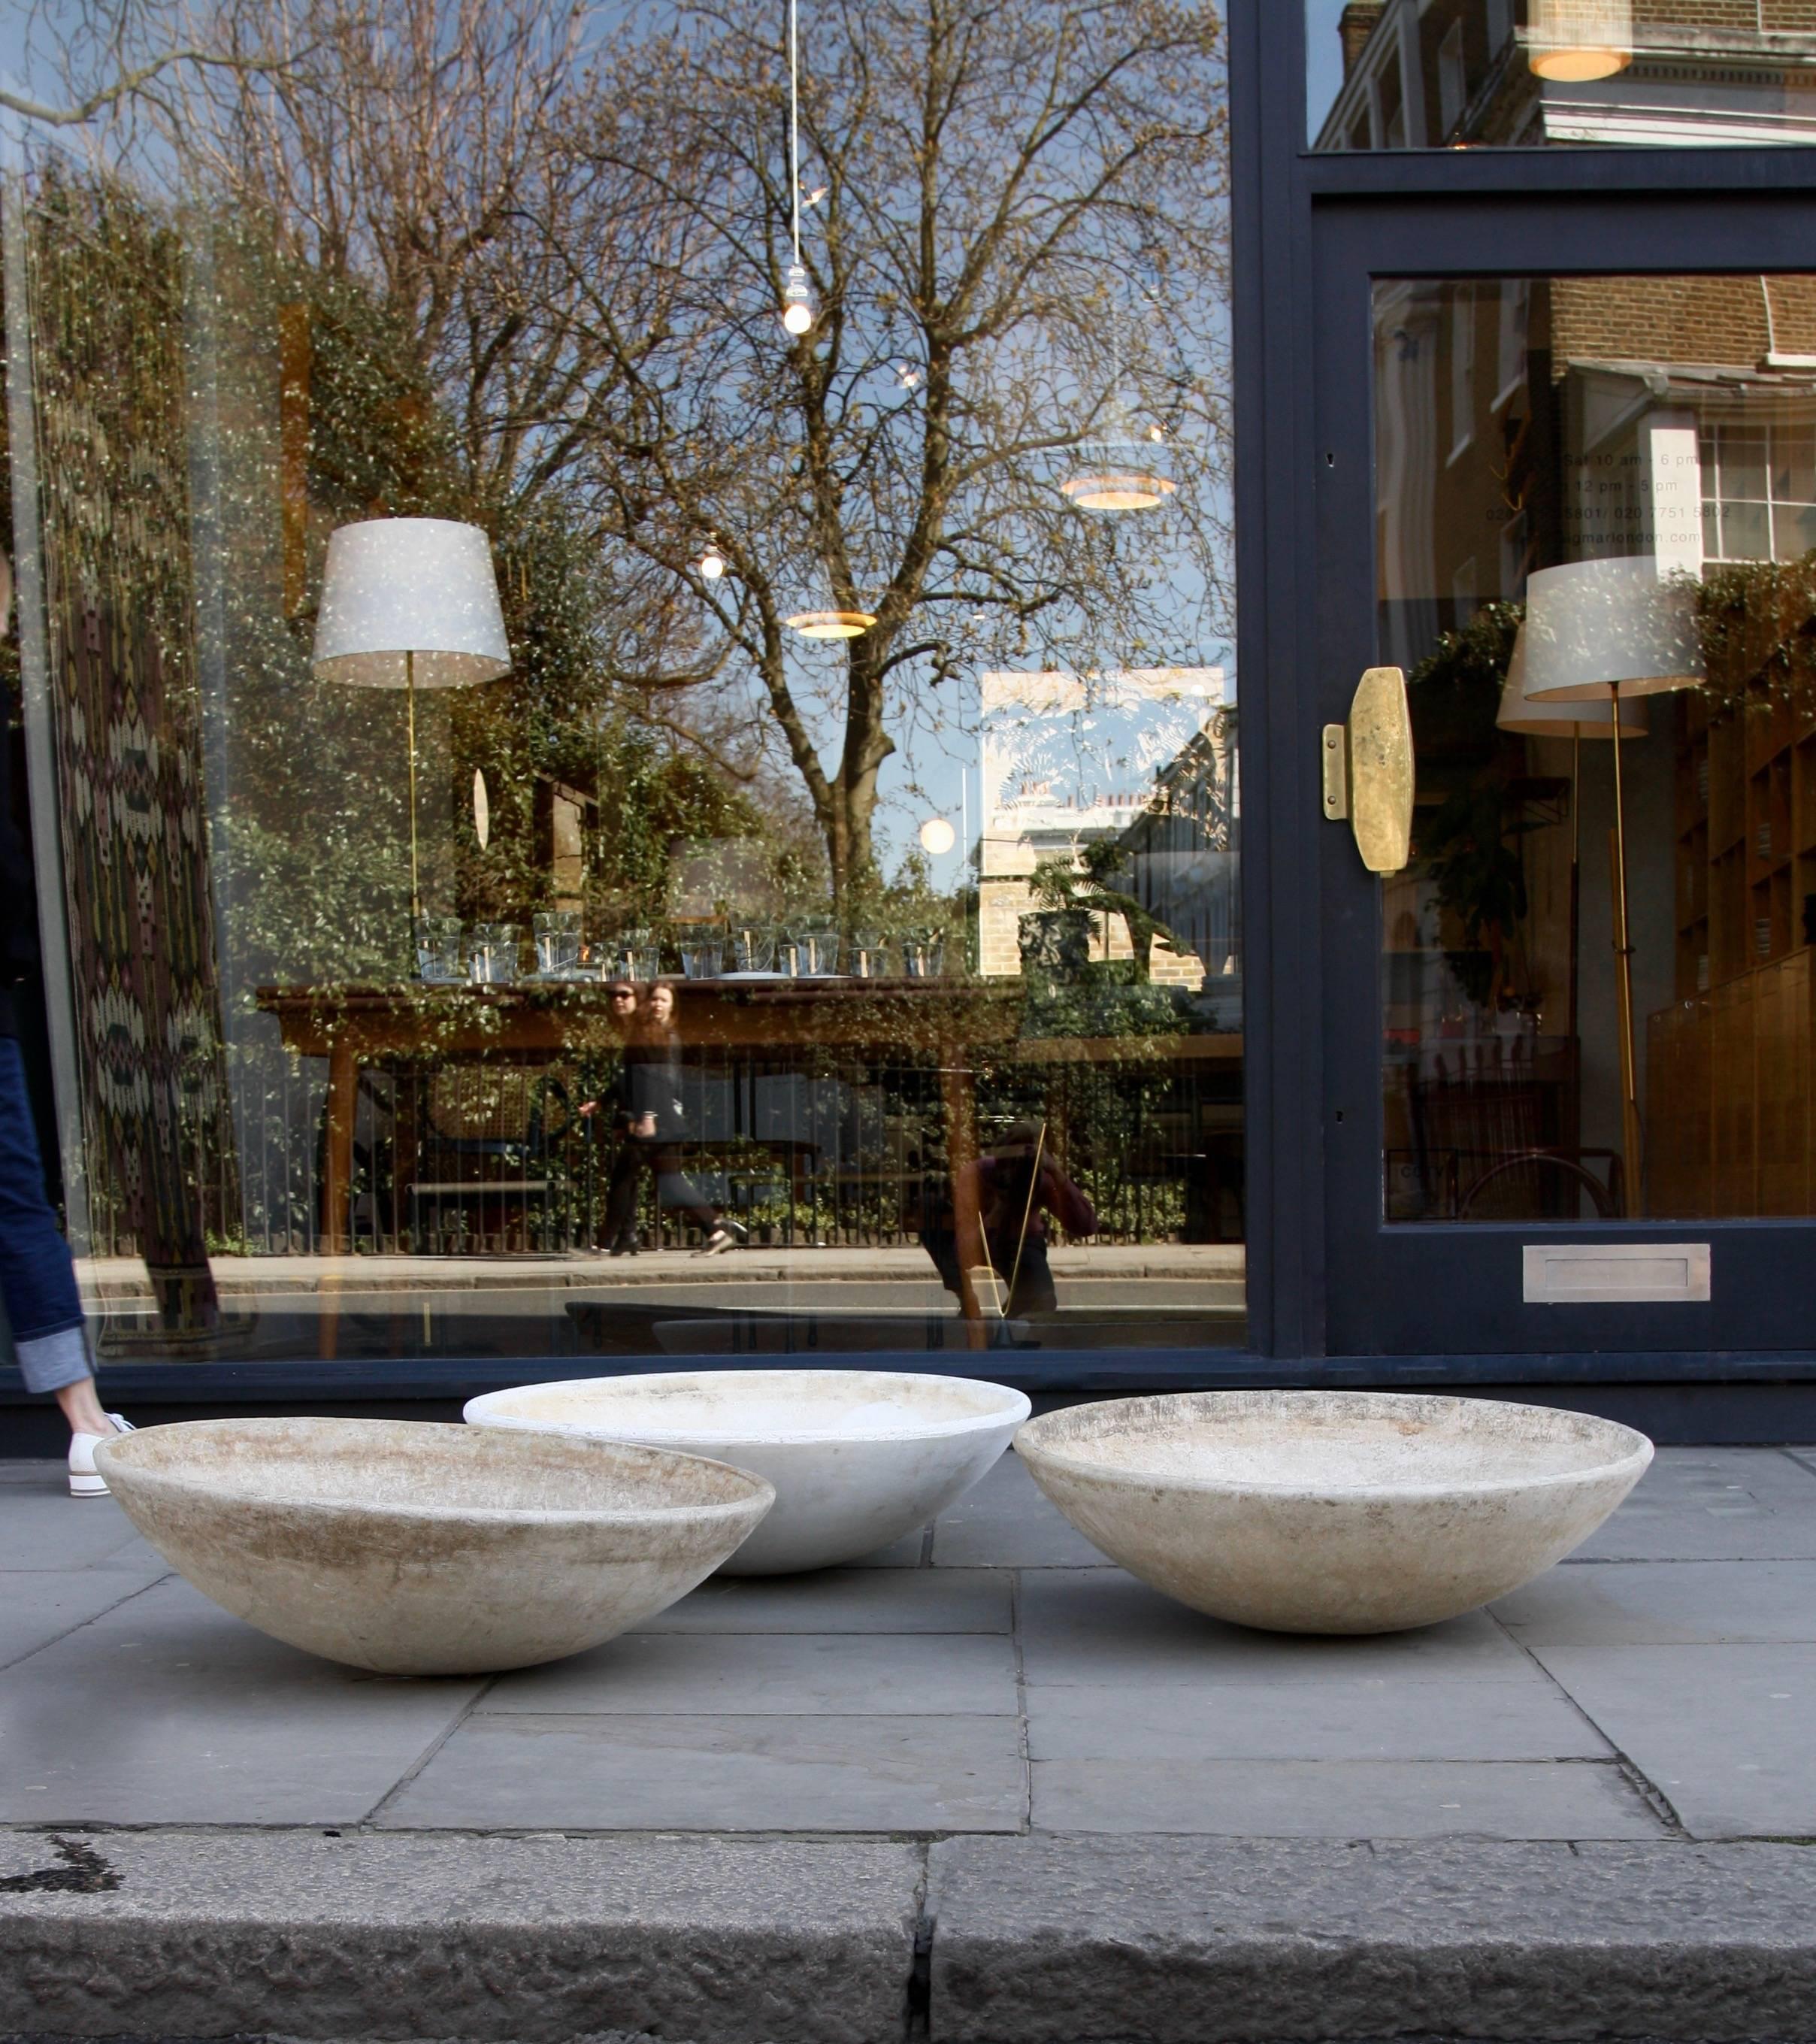 Three extra large flying saucer shaped concrete planters designed by Willy Guhl in the 1950s.
The pots are made from fibre cement by Eternit (which is sometimes used as a generic term for fibre cement).
These fantastically shaped planters are